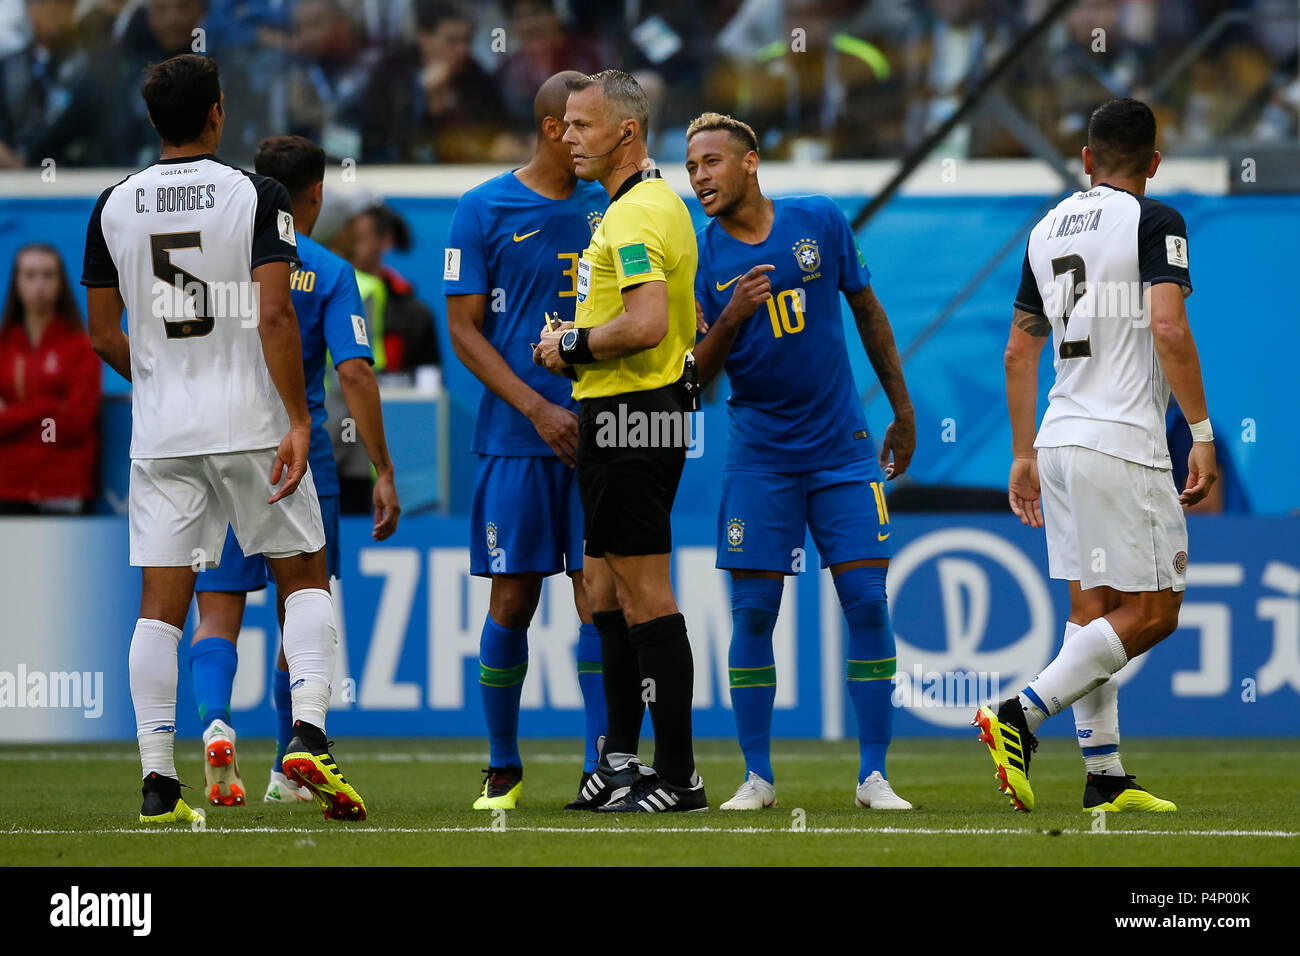 Saint Petersburg, Russia. 22nd June 2018. Neymar of Brazil contests a decision with referee Bjorn Kuipers during the 2018 FIFA World Cup Group E match between Brazil and Costa Rica at Saint Petersburg Stadium on June 22nd 2018 in Saint Petersburg, Russia. (Photo by Daniel Chesterton/phcimages.com) Credit: PHC Images/Alamy Live News Stock Photo